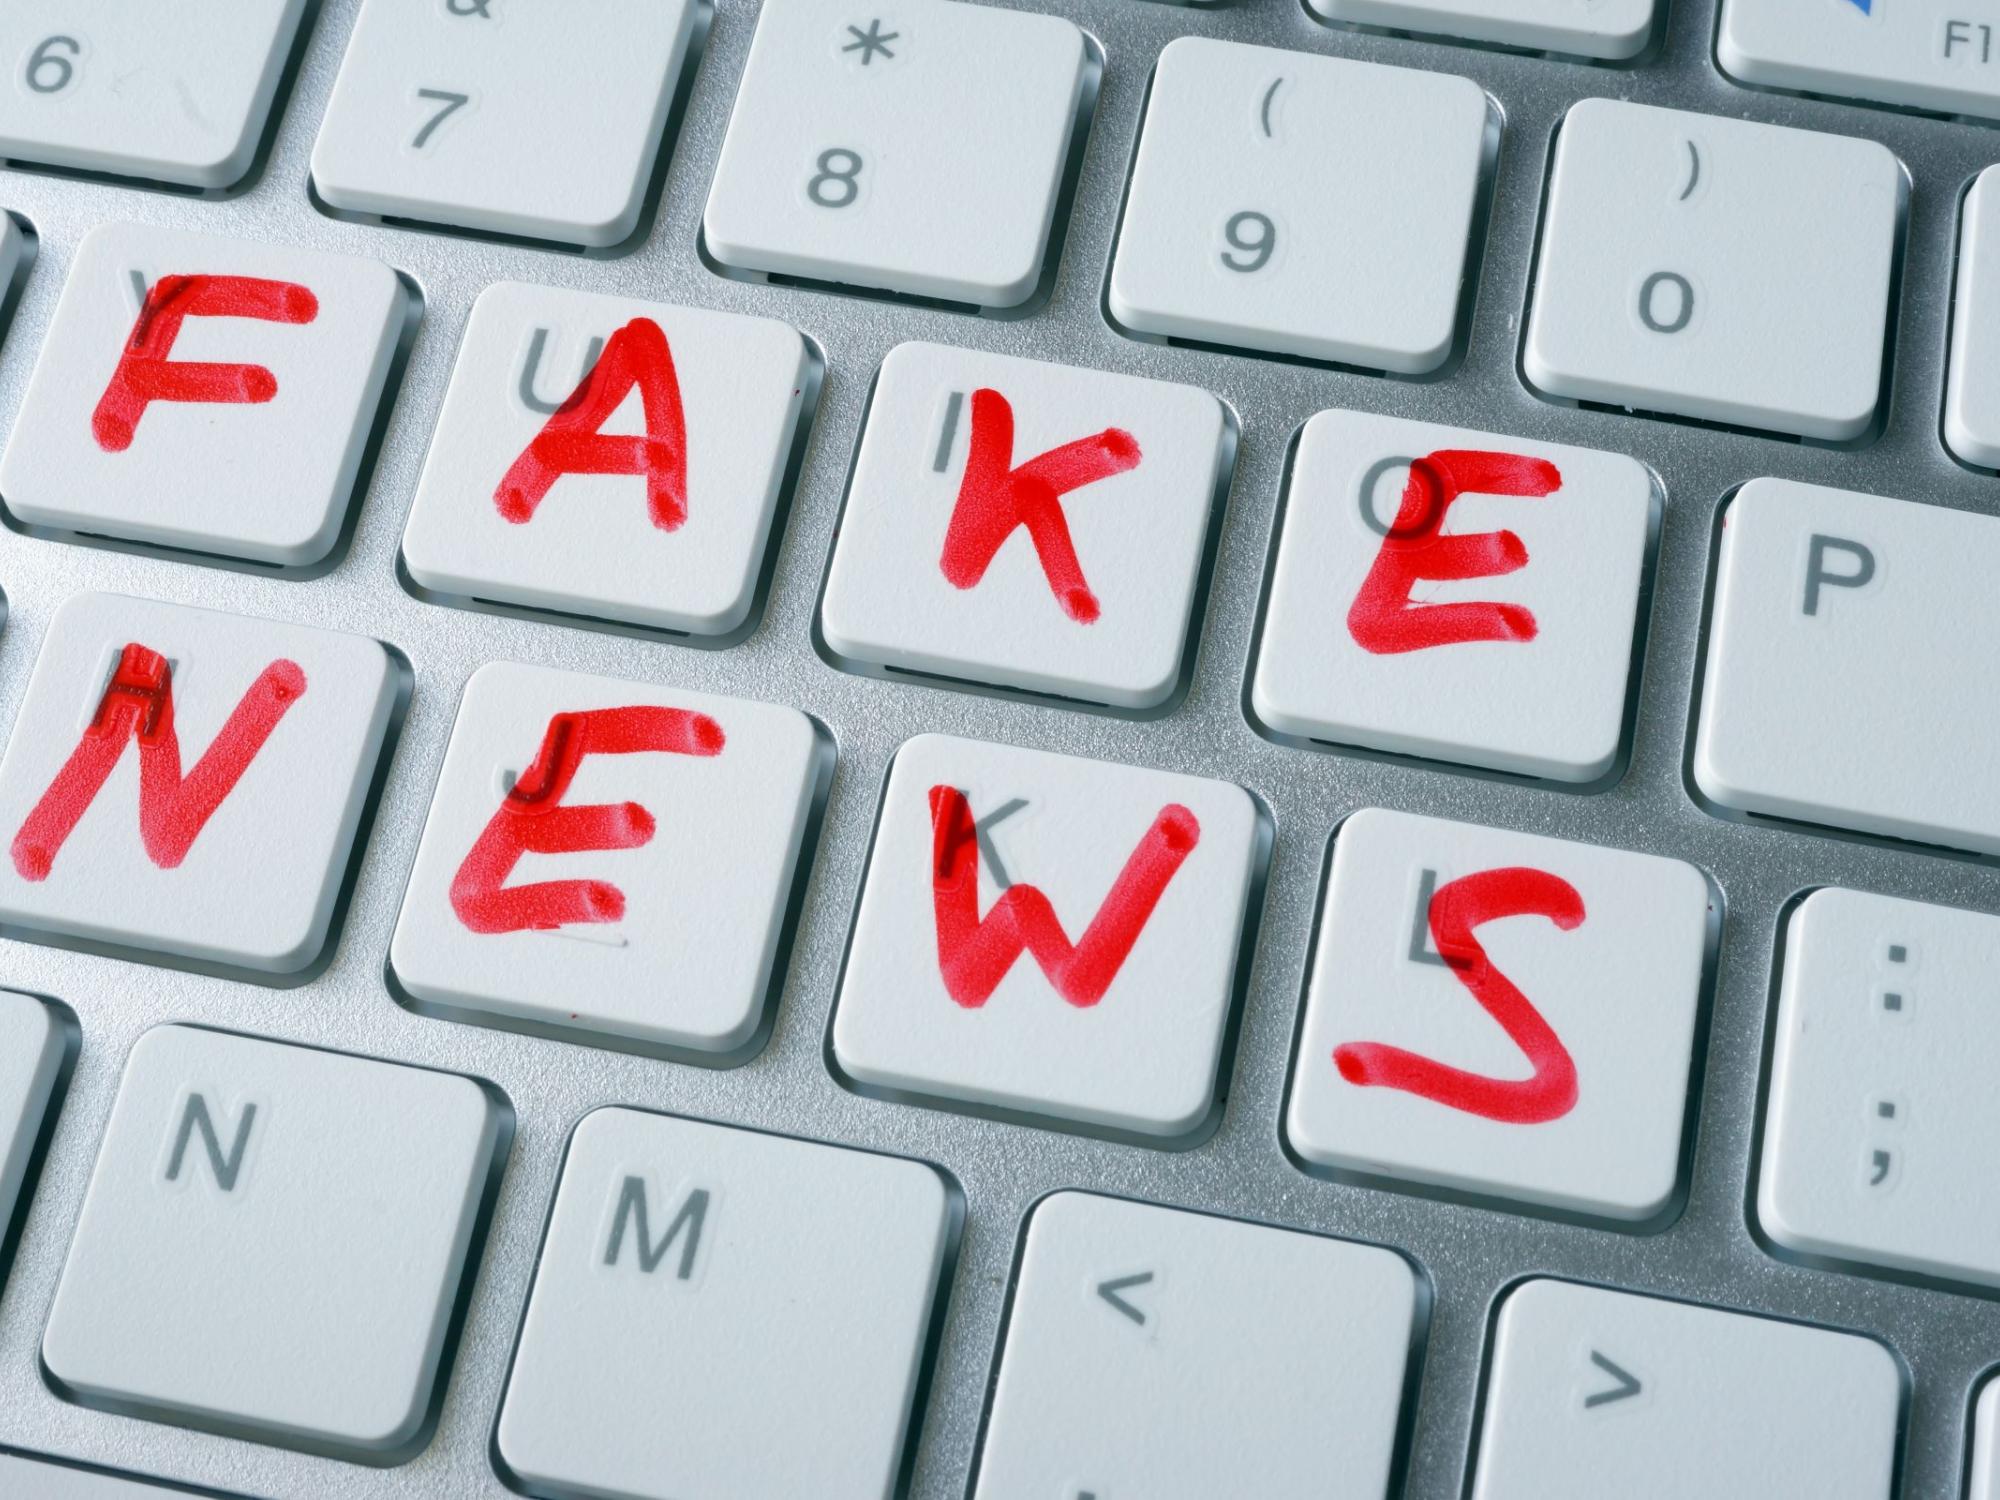 True: Fact checkers tend to agree on validity of news claims, researchers say